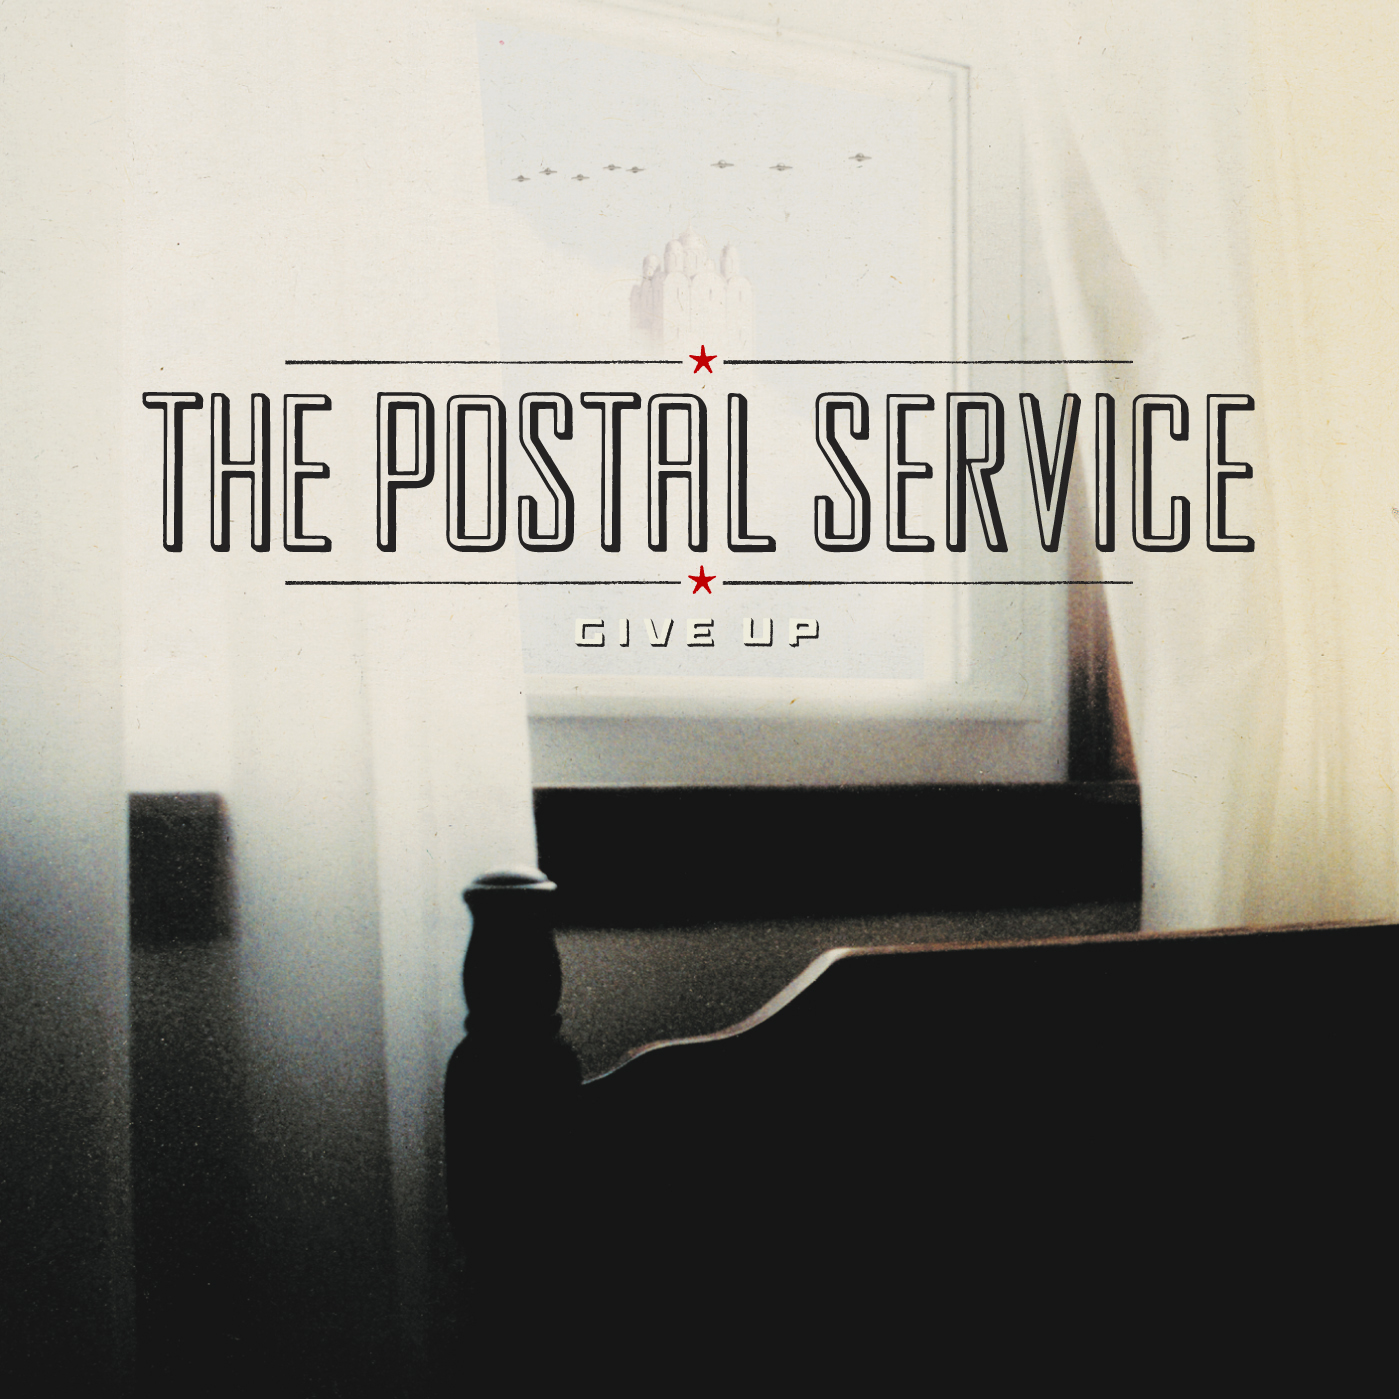 The Postal Service "Give Up" LP